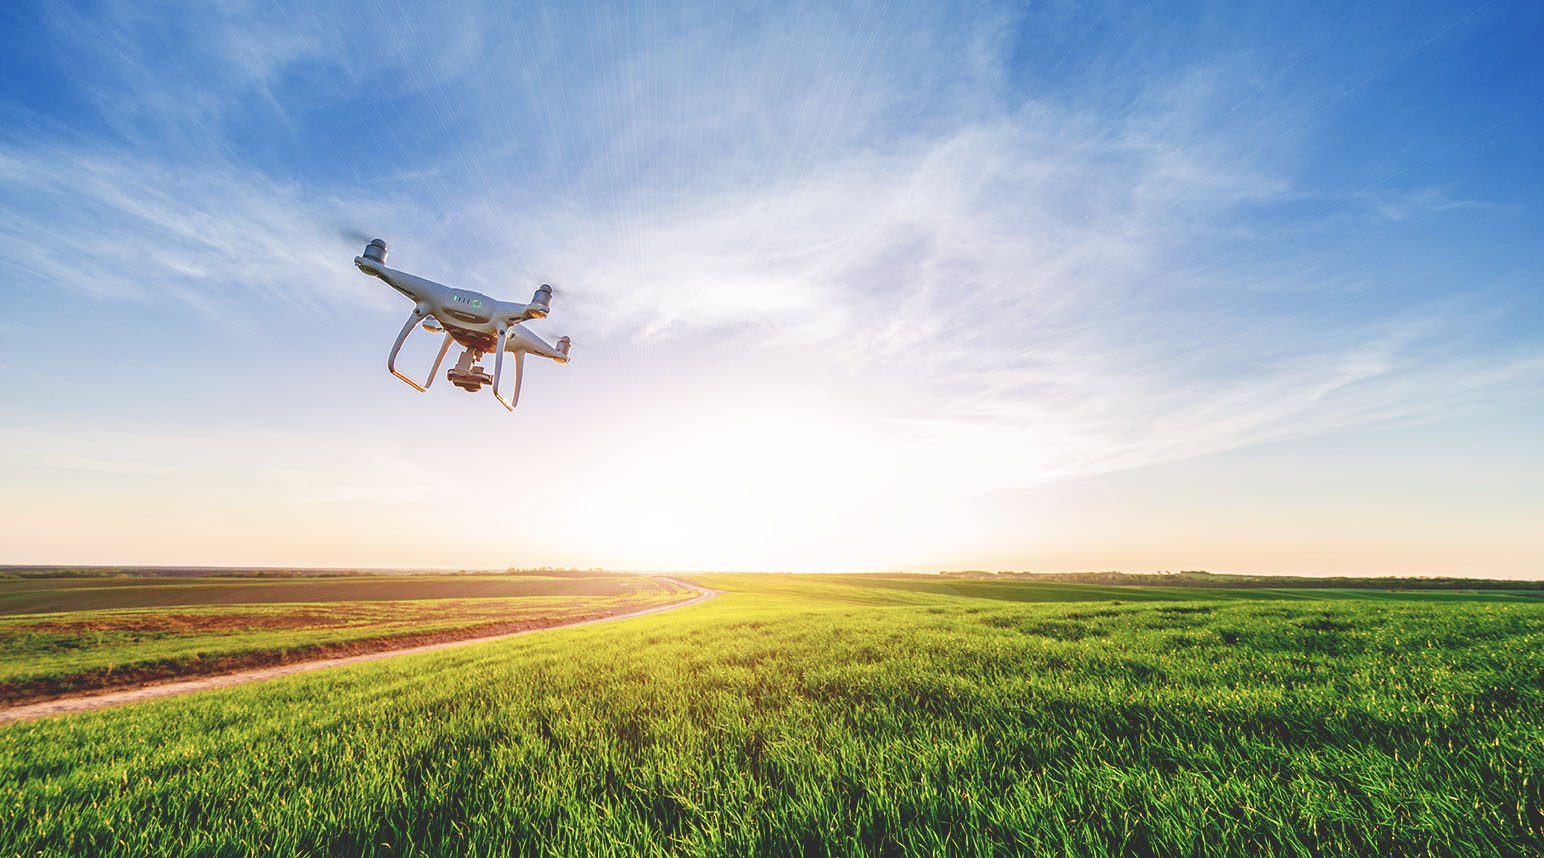 A white drone flies in a blue cloud-streaked sky over a green grassy field